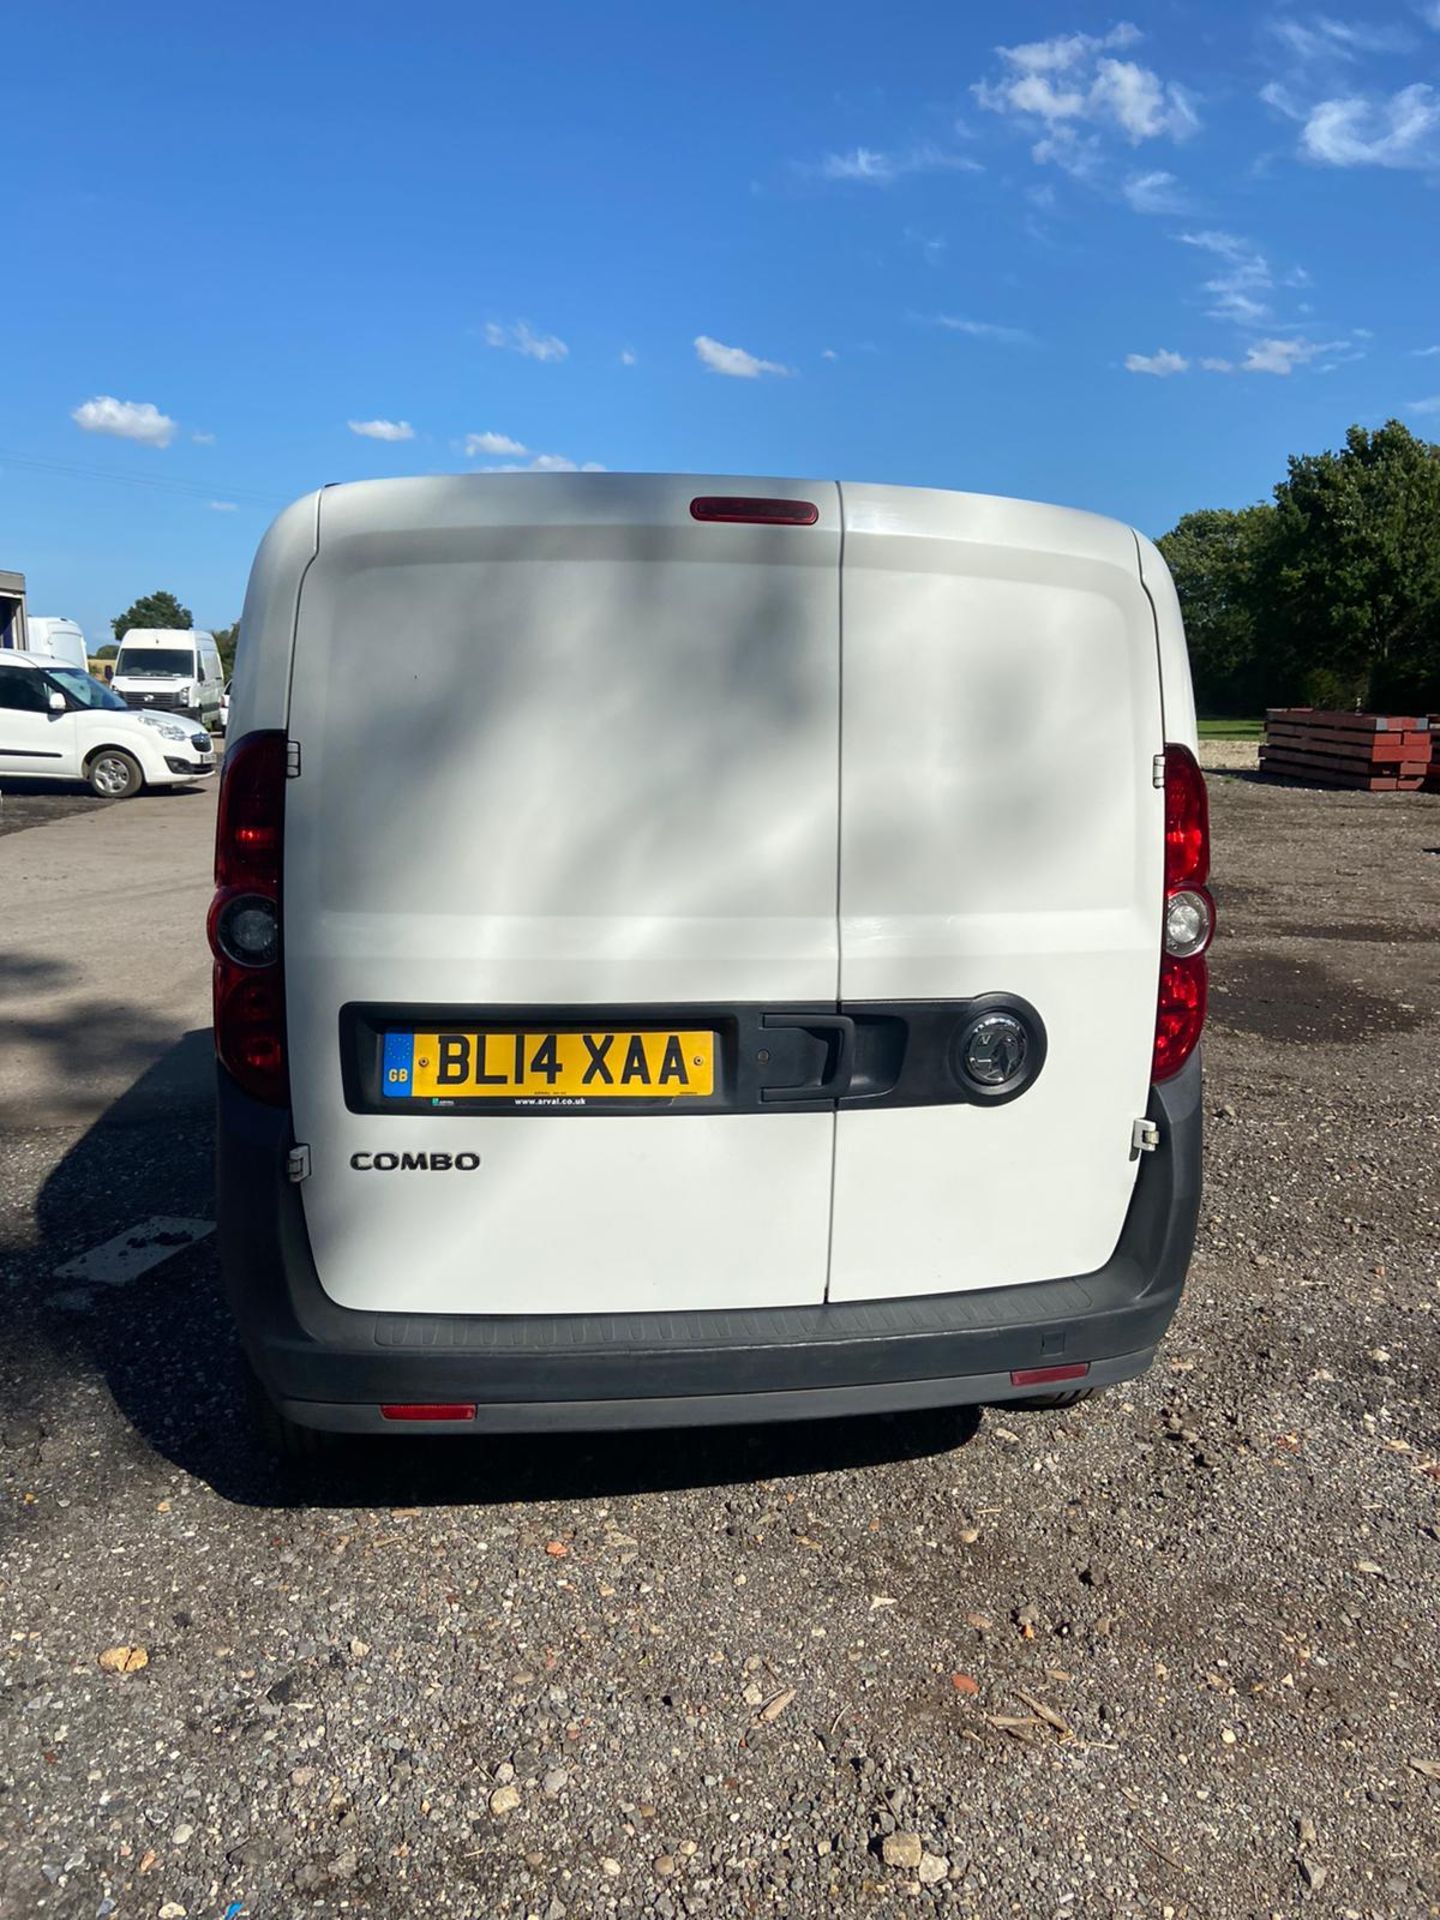 2014/14 REG VAUXHALL COMBO 2000 L1H1 CDTI 1.25 DIESEL WHITE PANEL VAN, SHOWING 0 FORMER KEEPERS - Image 5 of 9